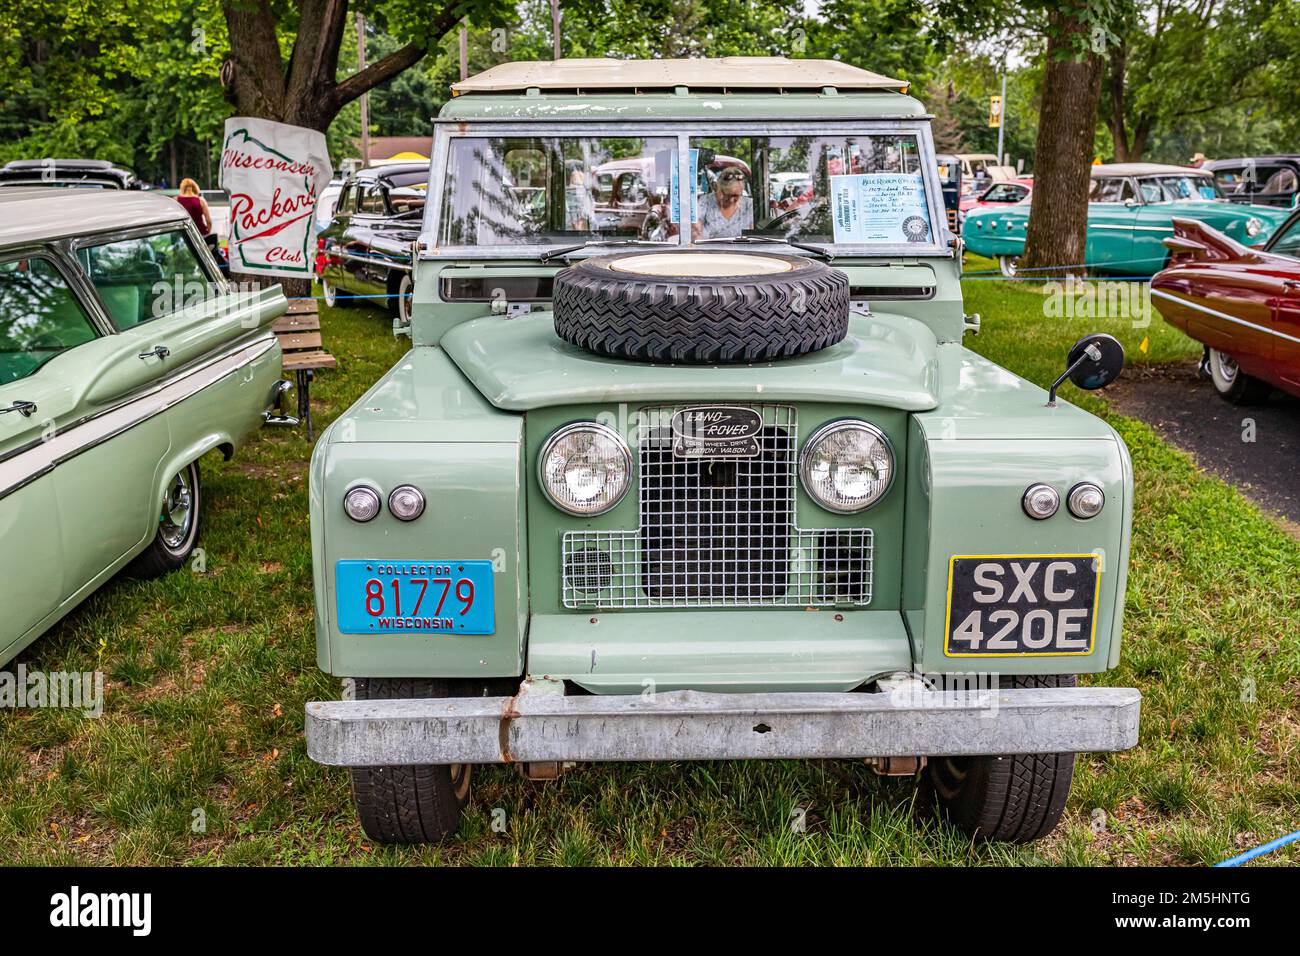 Iola, WI - July 07, 2022: High perspective front view of a 1967 Land Rover 88 Series IIA Station Wagon at a local car show. Stock Photo